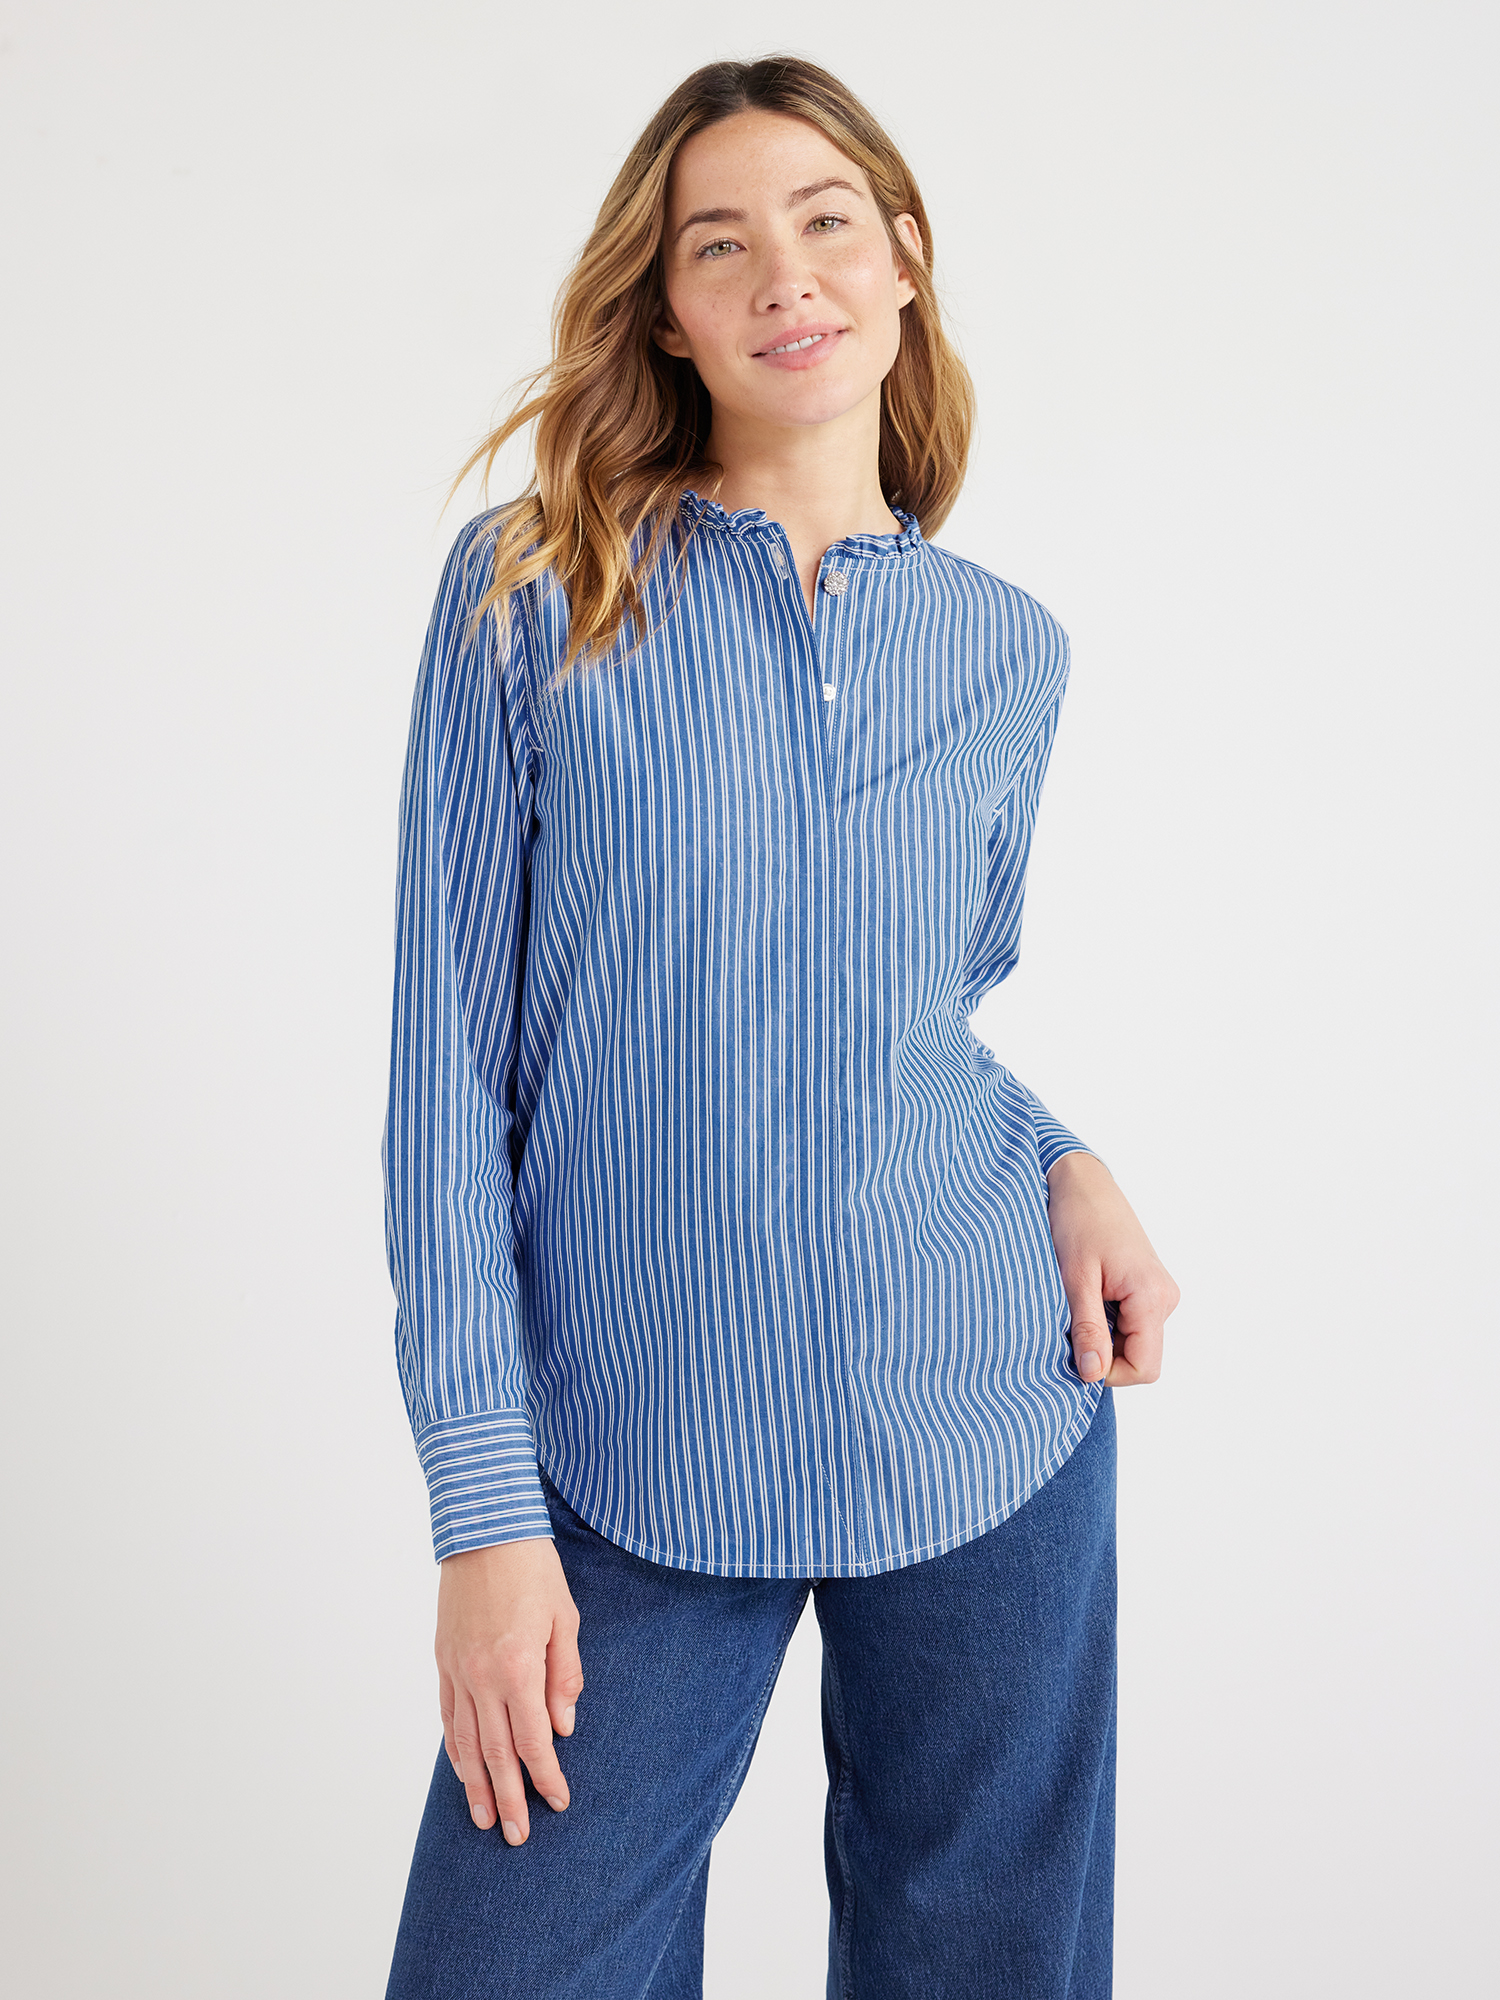 Free Assembly Womens Ruffle Neck Shirt with Long Sleeves, Sizes Xs-xxl